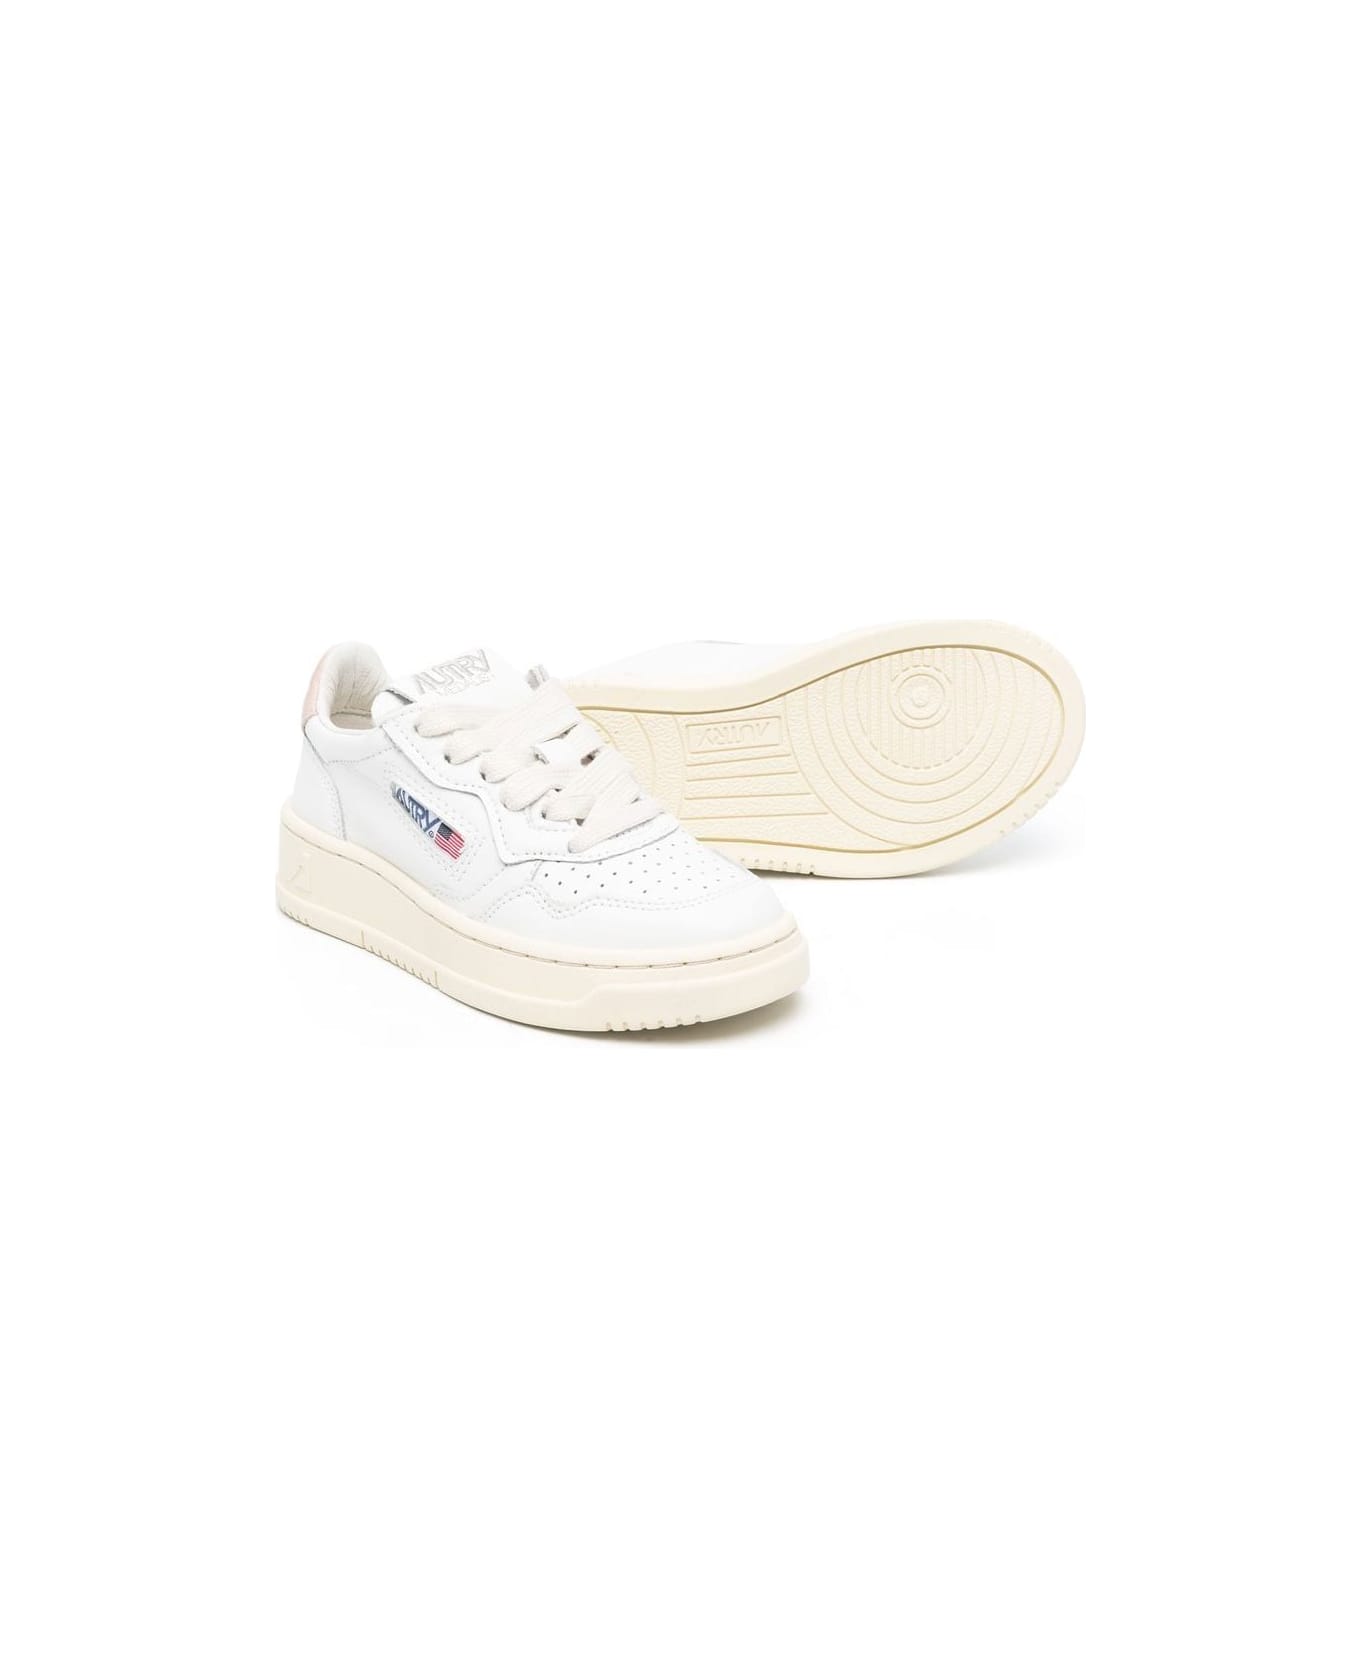 Autry Kids Medalist Low Sneakers - White シューズ